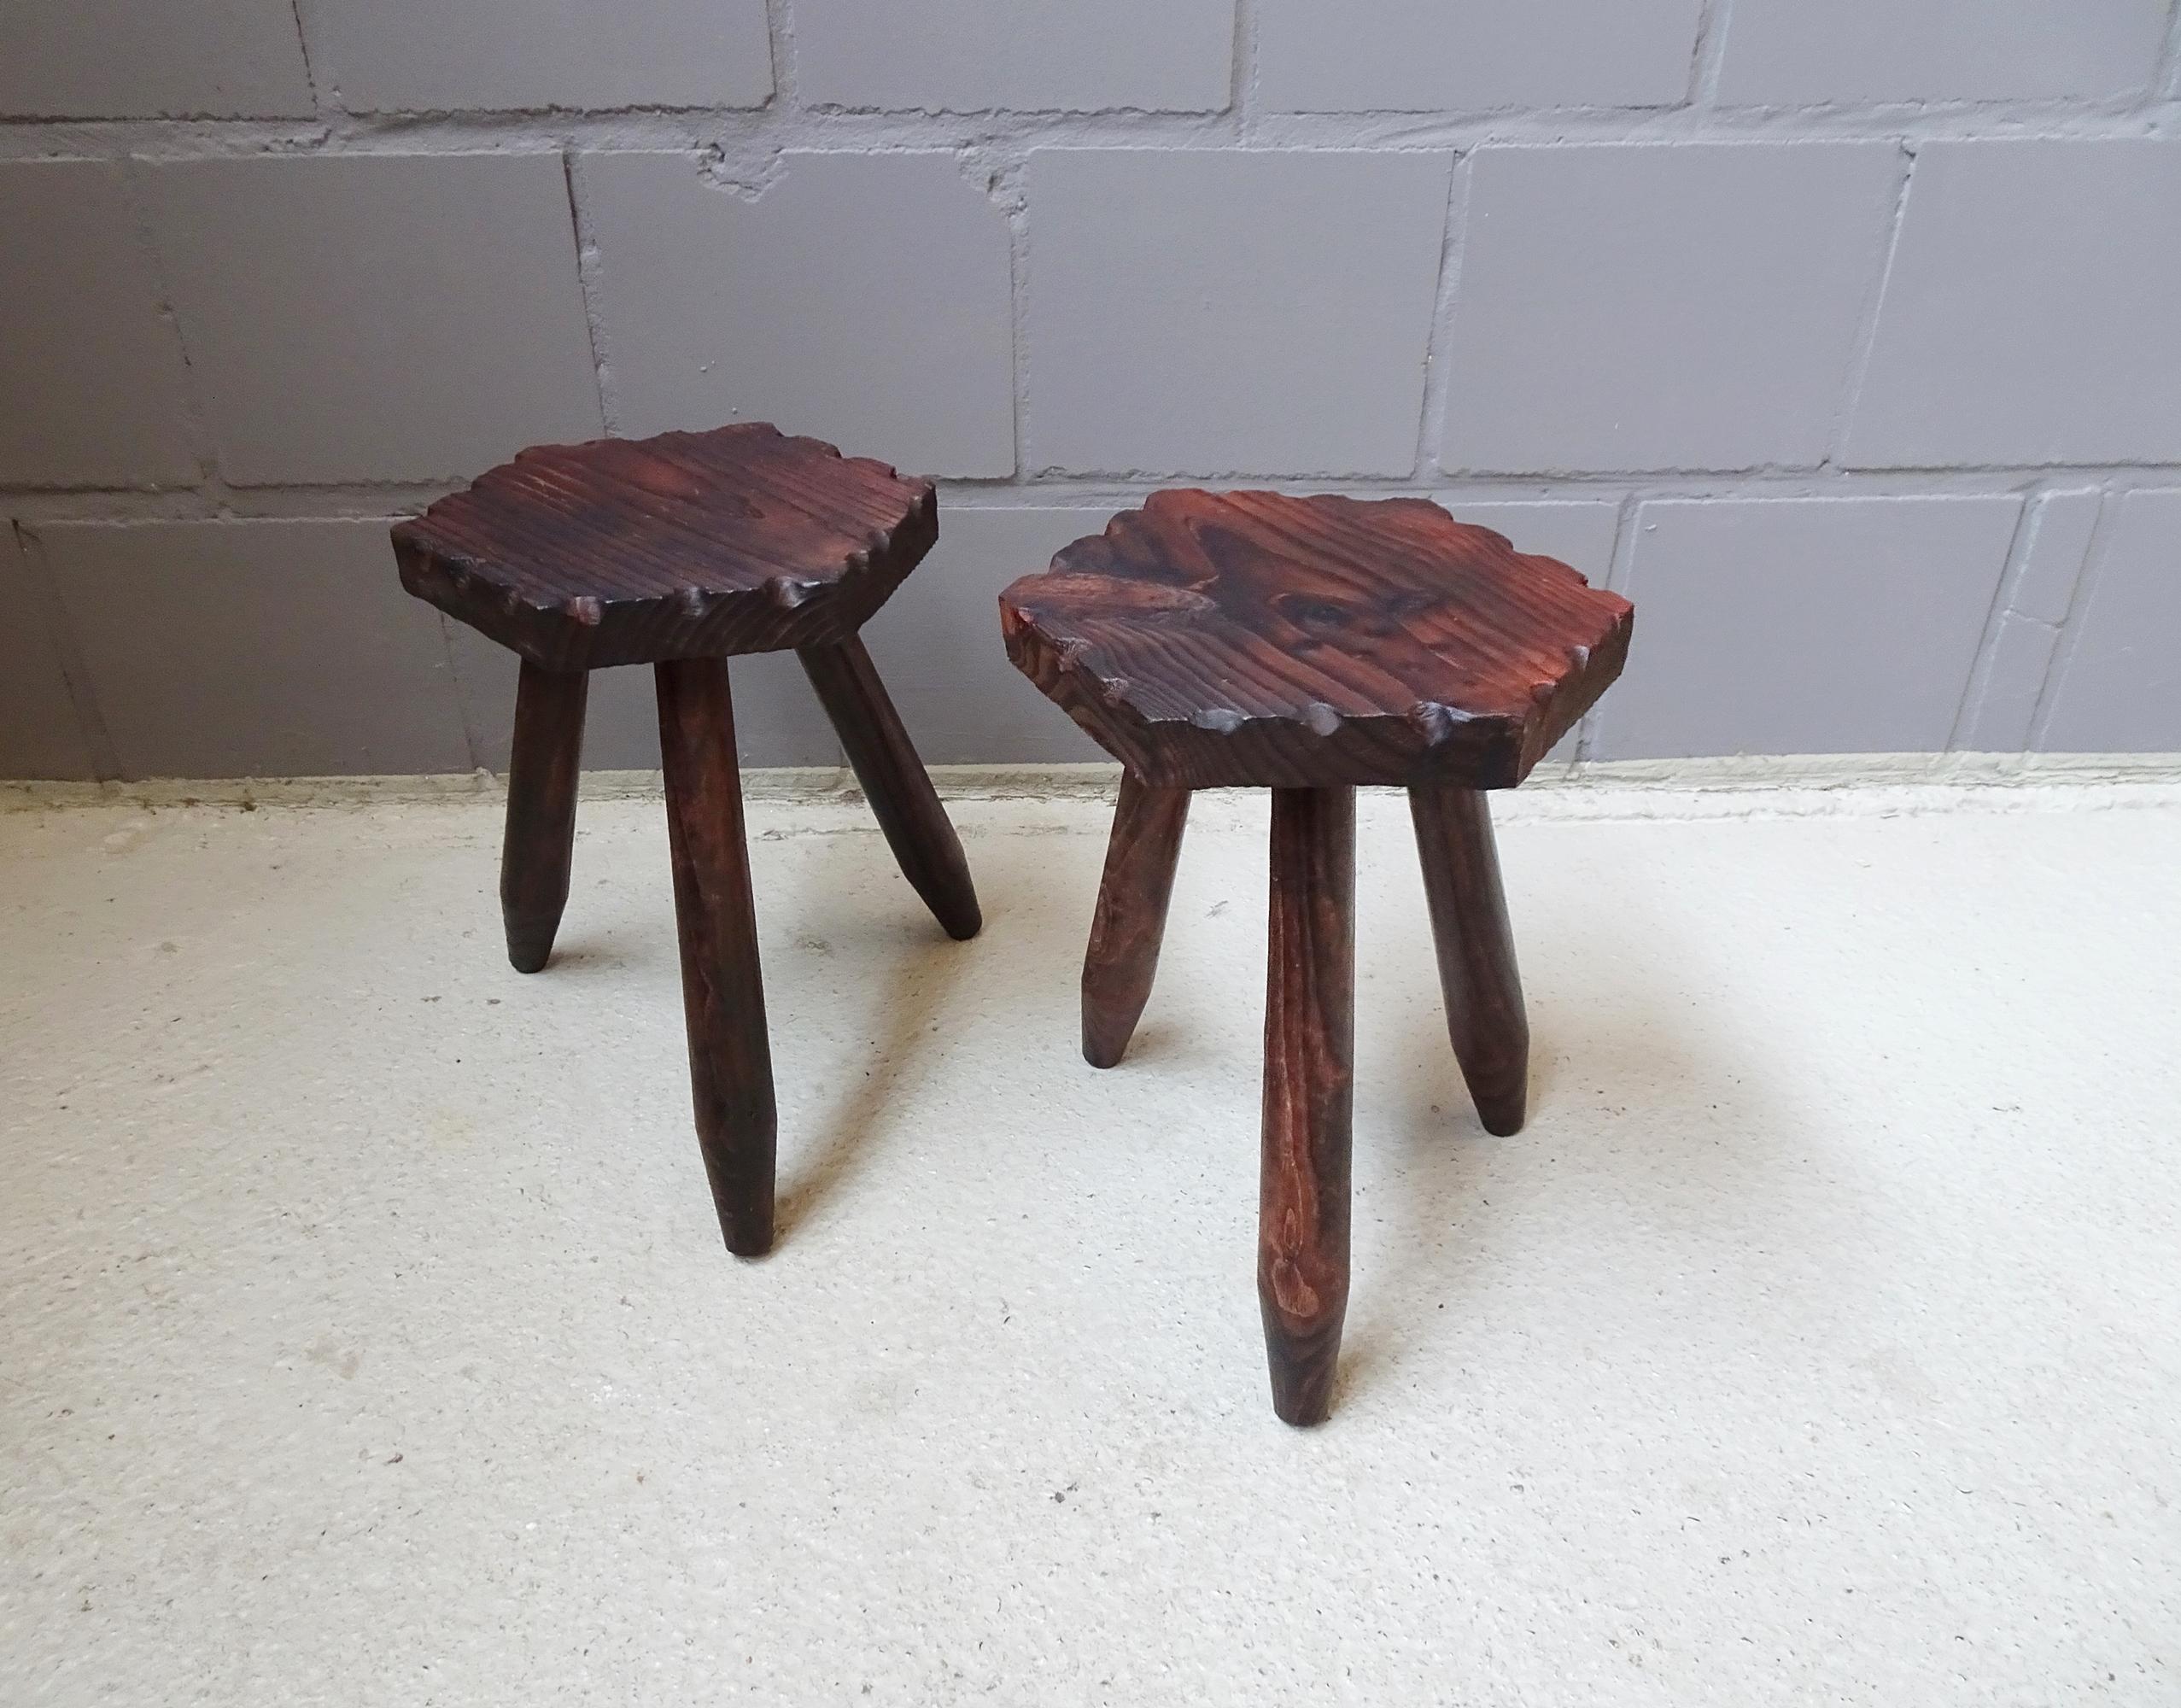 Set of two rustic wooden tripod stools. Hexagonal seat with slight notches and three flared legs. The solid, dark oiled wood enhances the rustic look.

Two handcrafted tripod stools, simple and natural, can be easily combined with modern